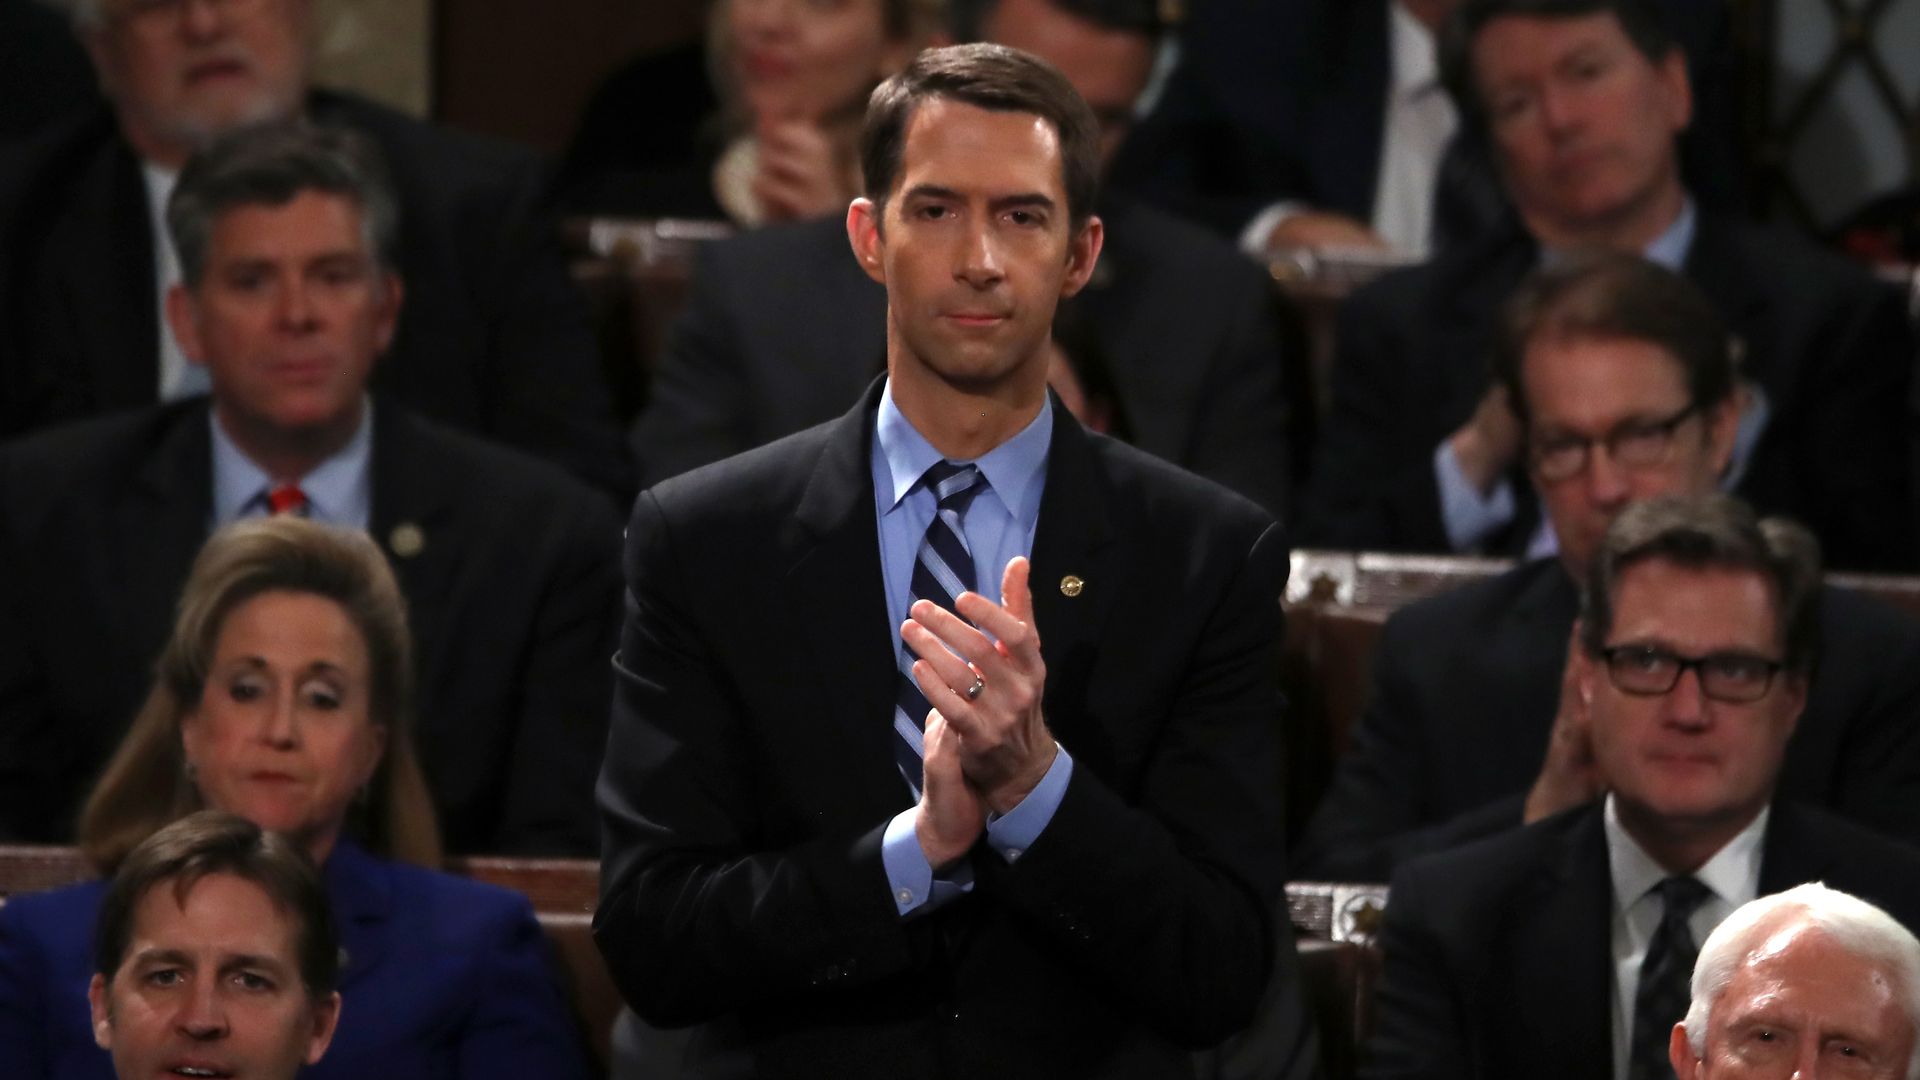 Tom Cotton standing and clapping. 